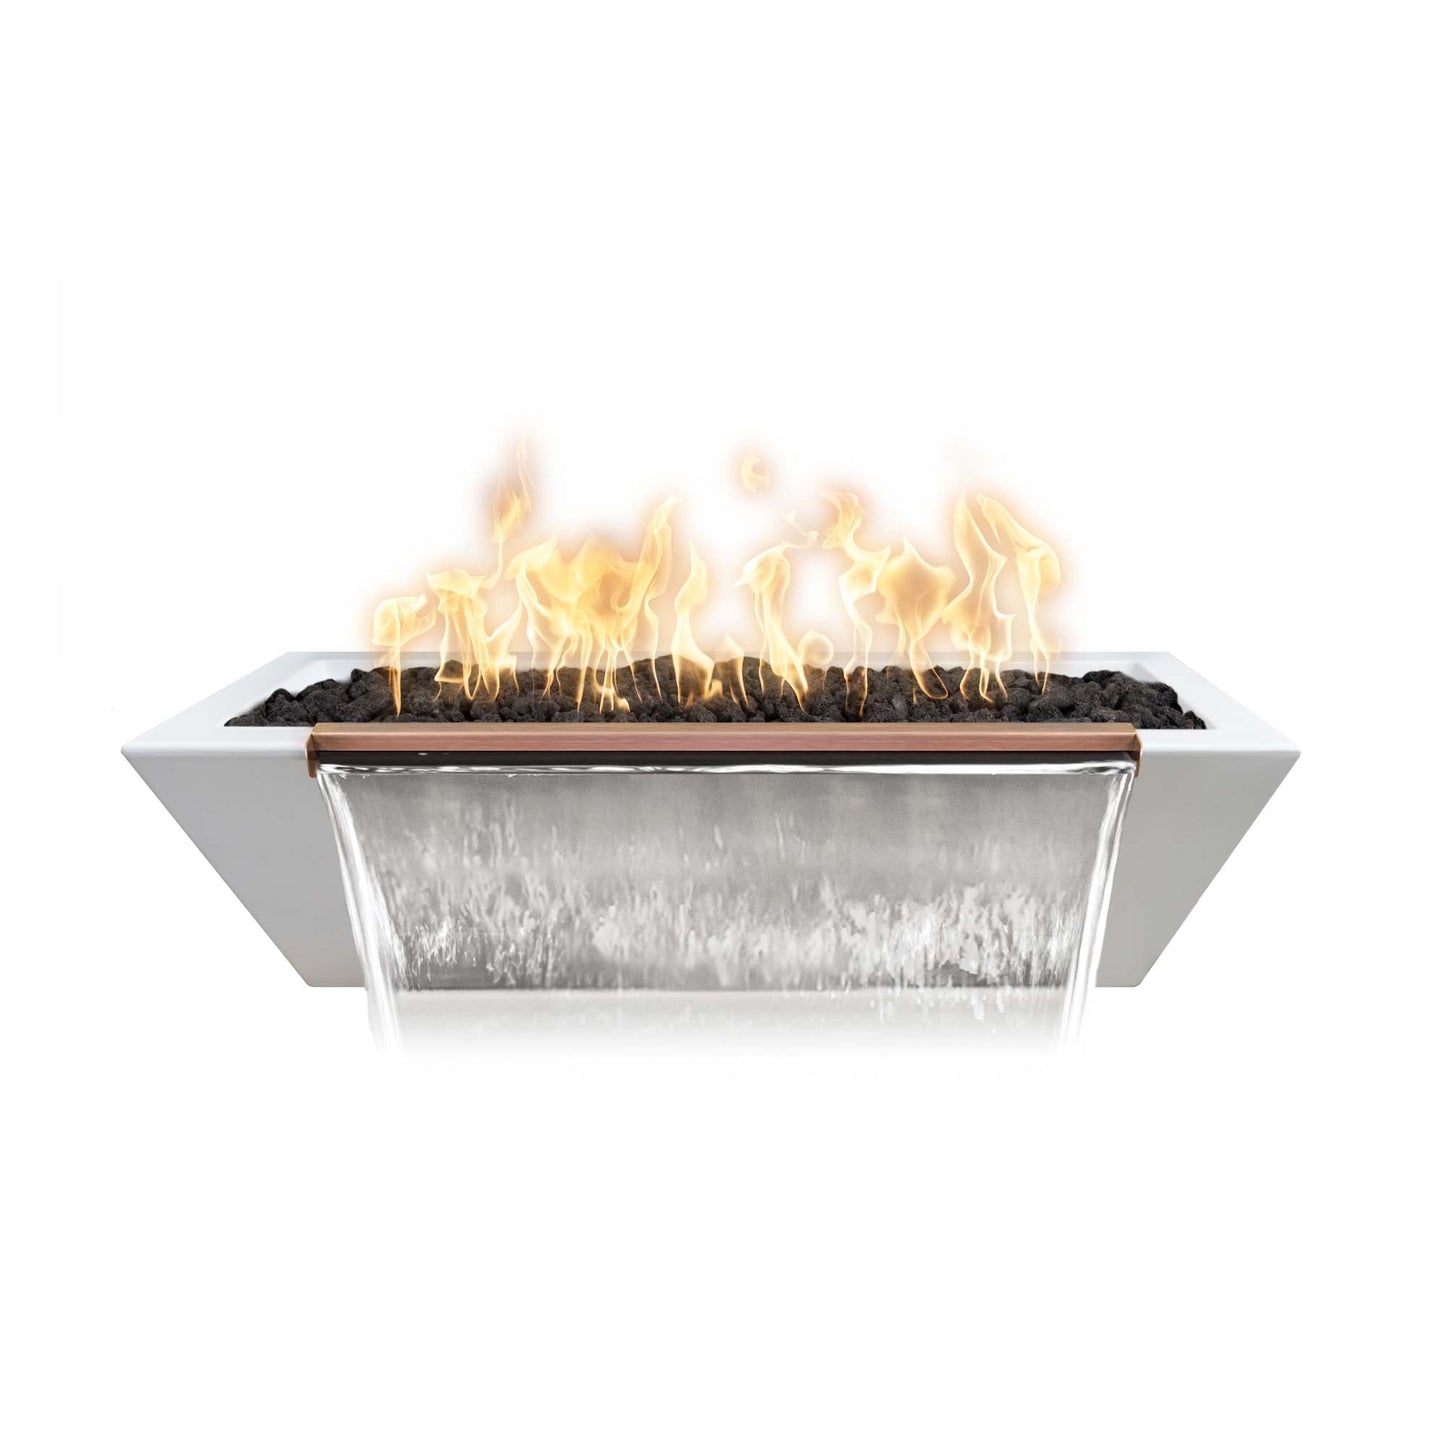 The Outdoor Plus Linear Maya 72" Vanilla GFRC Concrete Natural Gas Fire & Water Bowl with Match Lit Ignition